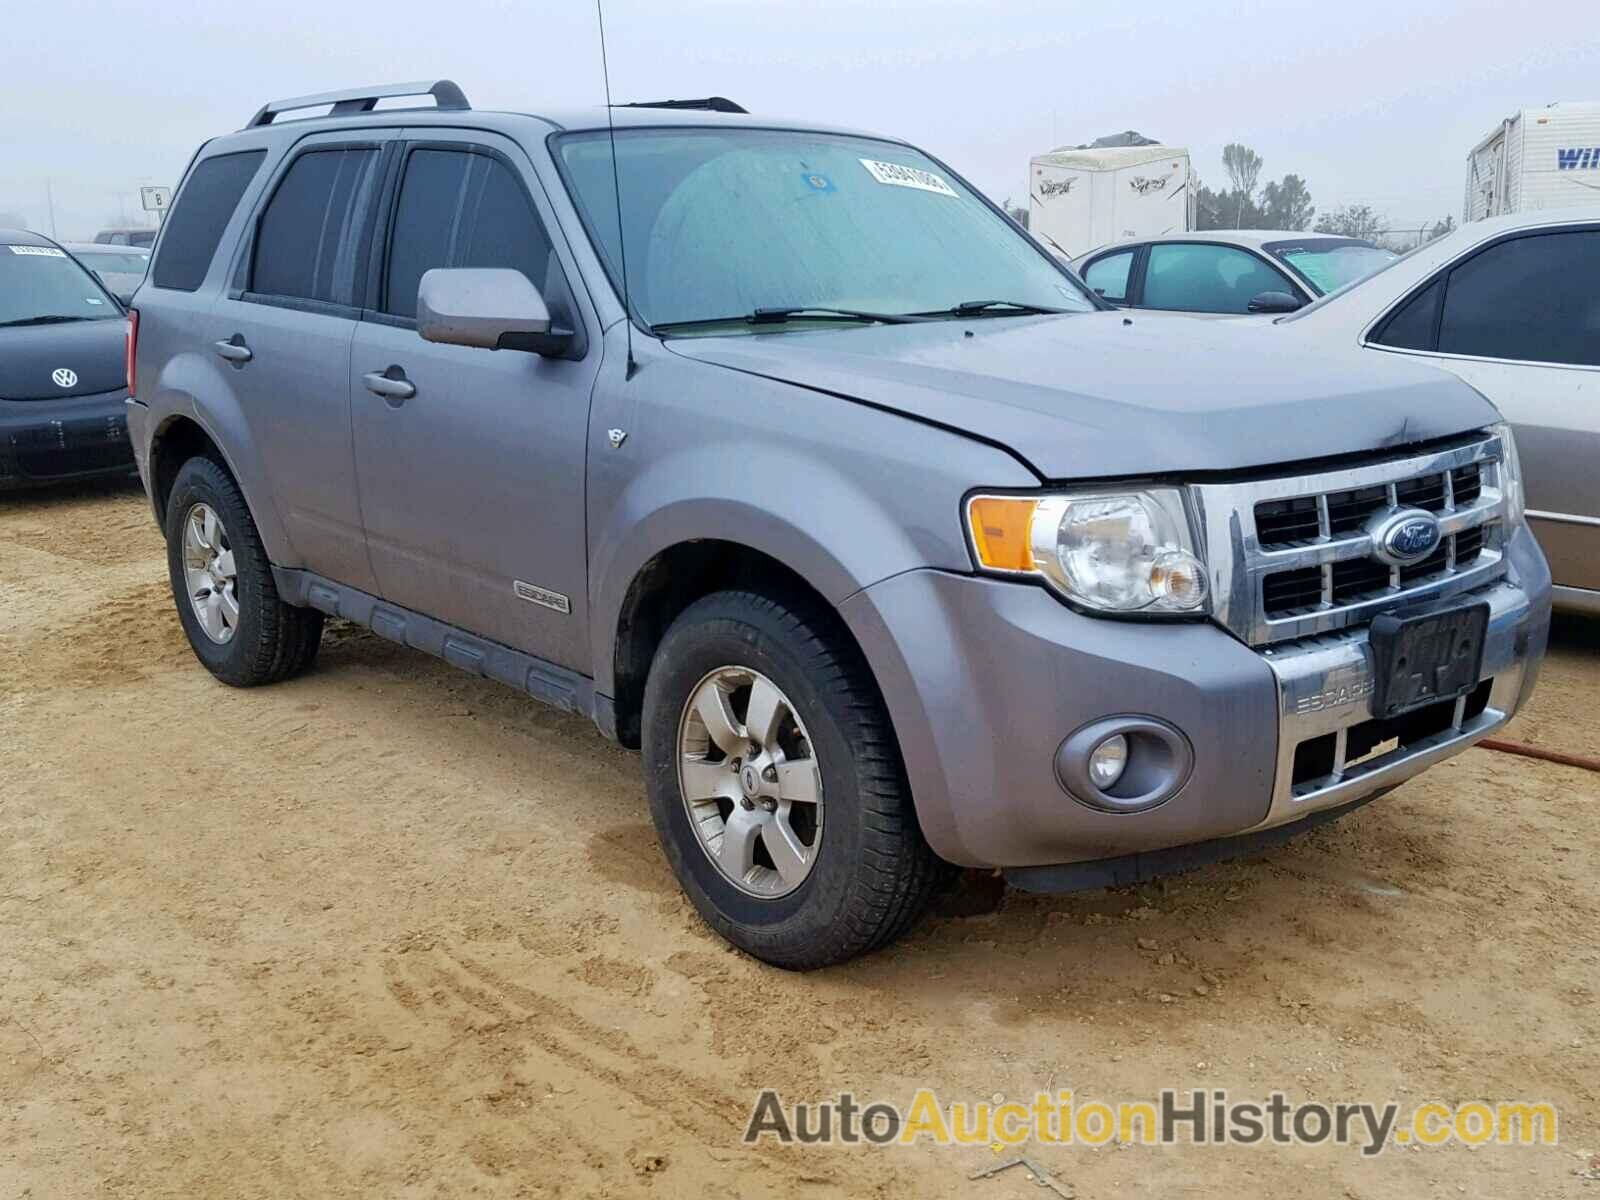 2008 FORD ESCAPE LIMITED, 1FMCU94158KD75175